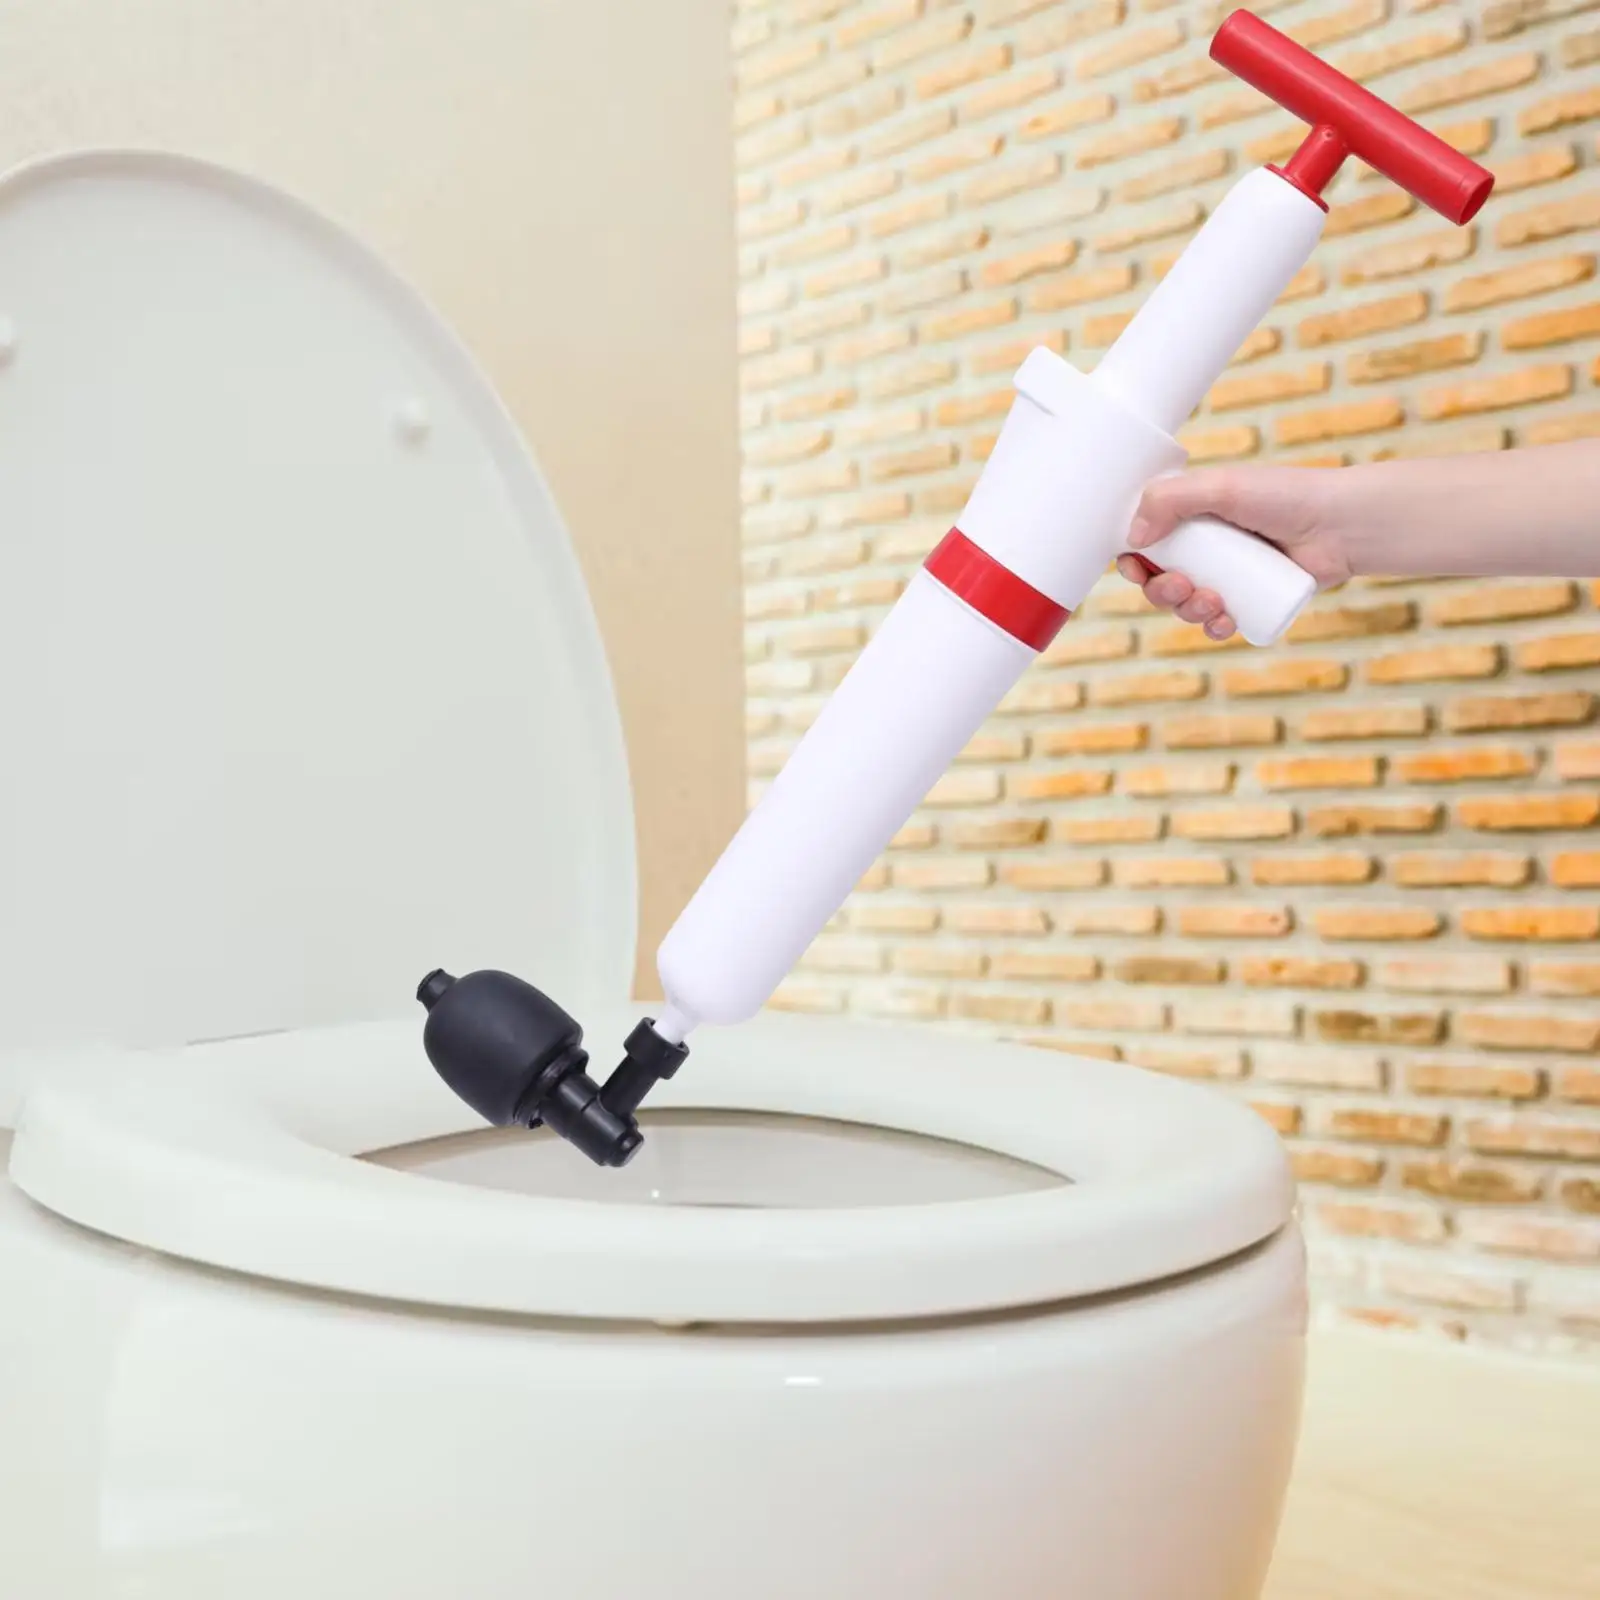 High Pressure Toilet Plunger Kit Air Drain Blaster Kit Clog Remover Plumbing Tools Air Toilet Unclogger for Kitchen Sink Home